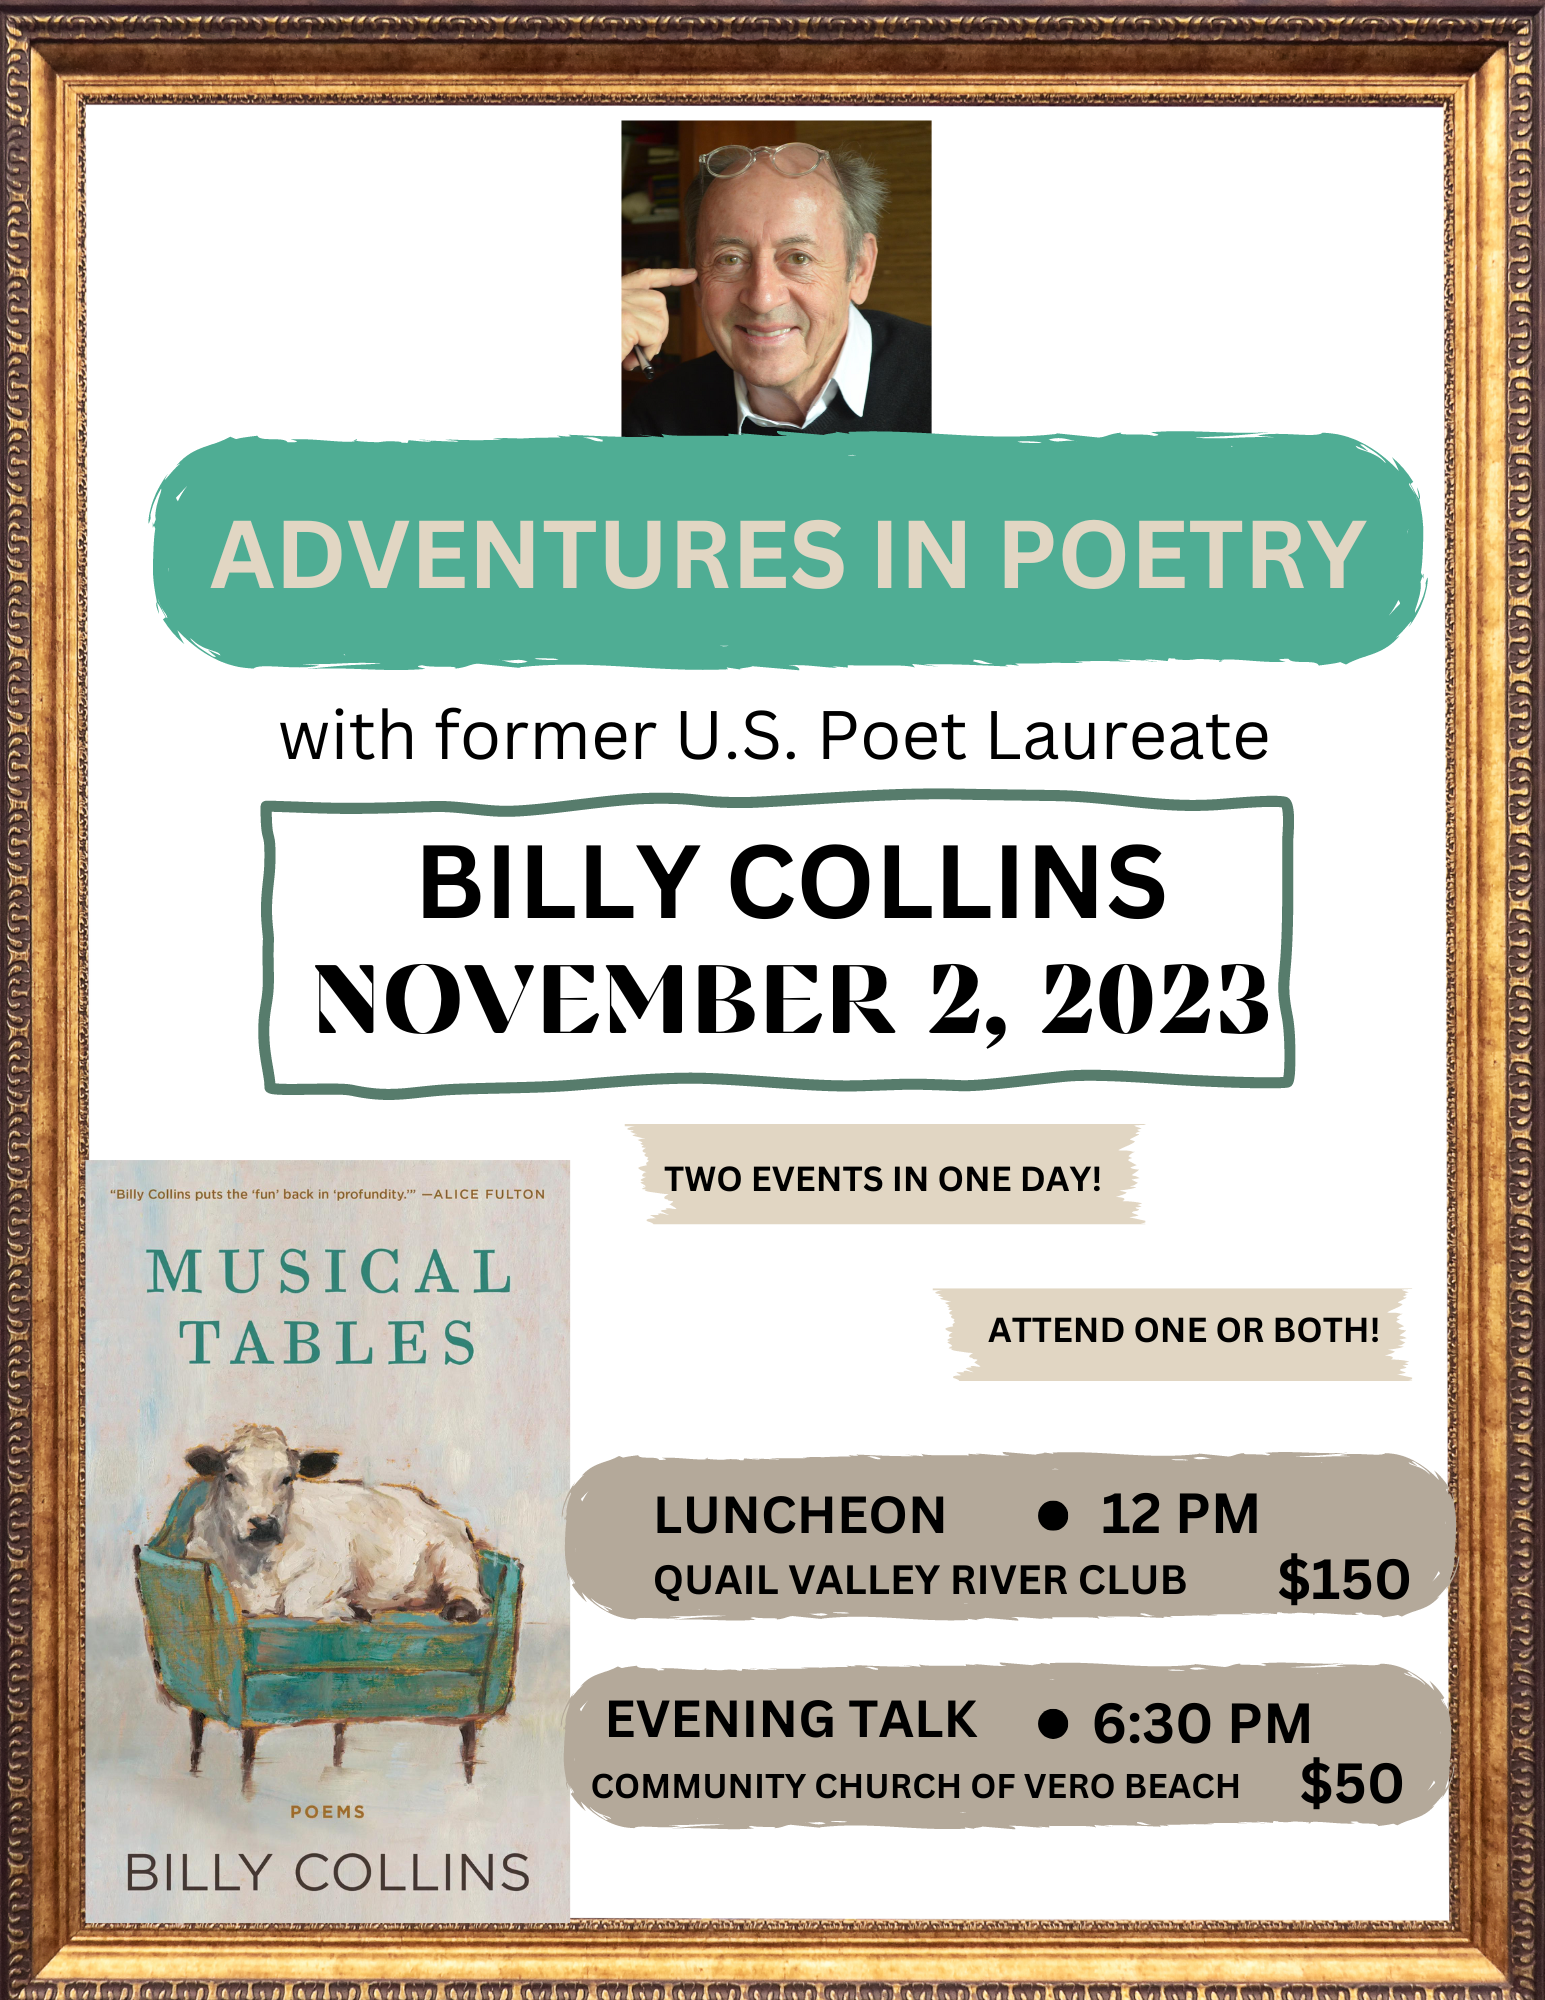 A flyer advertising the LRJF's special event featuring former US Poet Laureate Billy Collins, held on November 2nd, 2023. The event is titled 